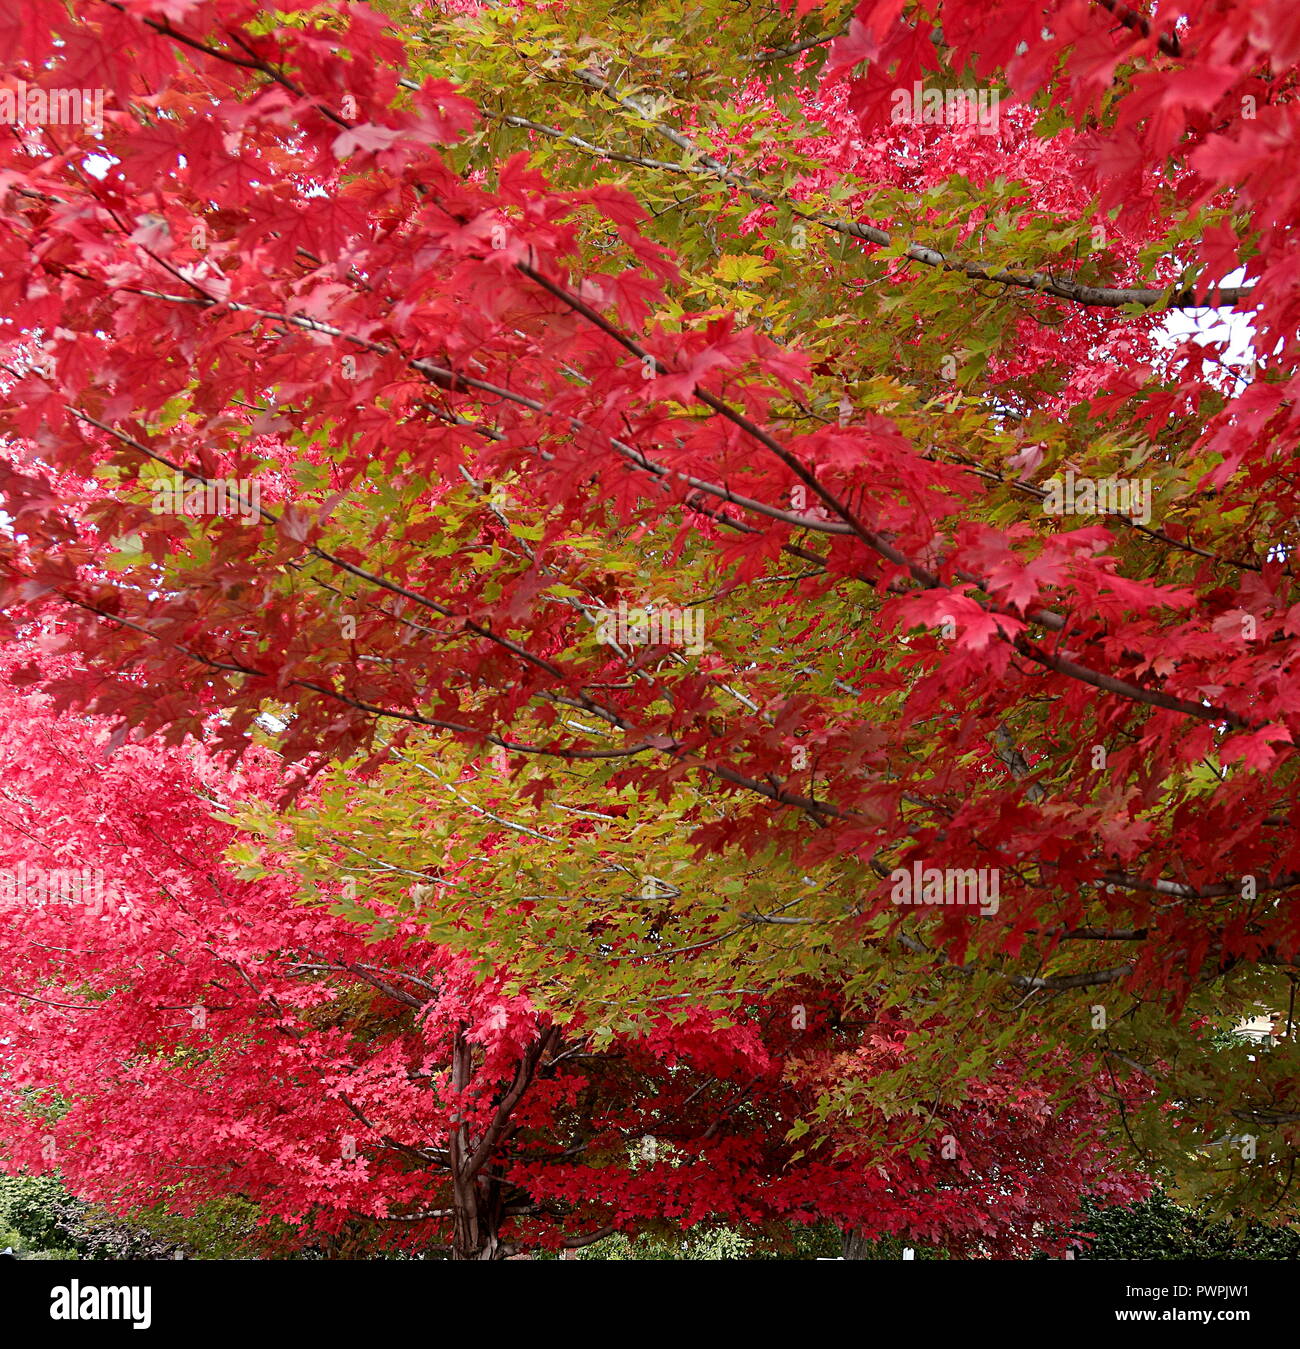 Red and yellow foliage on the branches of the maple trees in the autumn season, close-up fall background Stock Photo